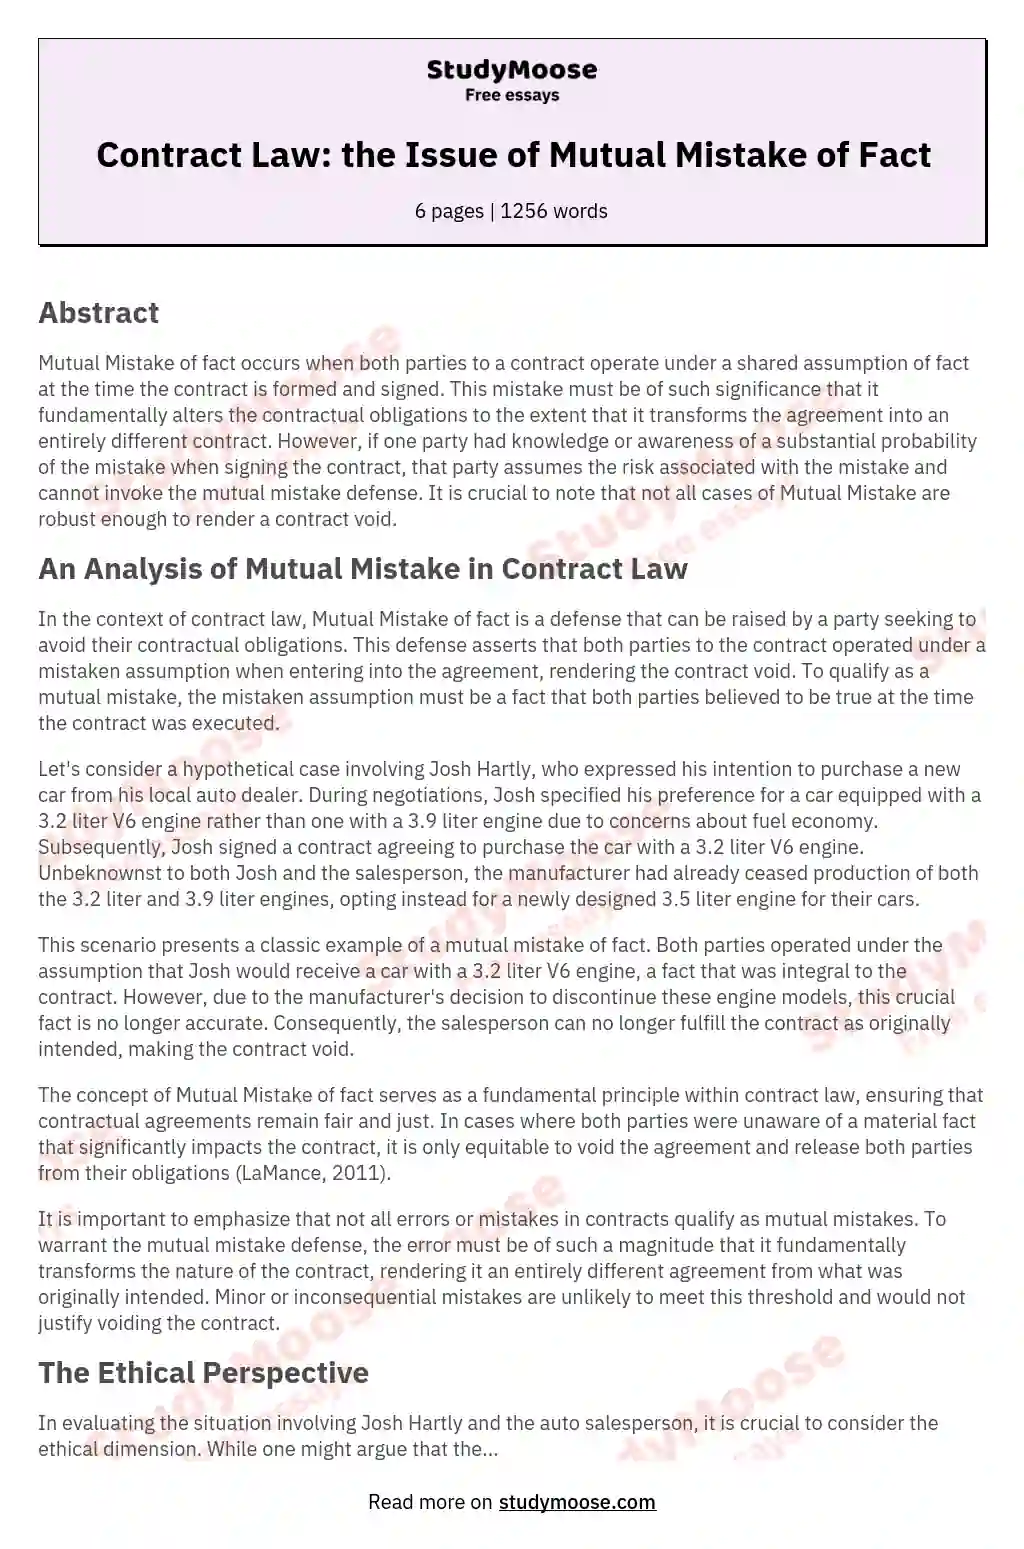 Contract Law: the Issue of Mutual Mistake of Fact essay